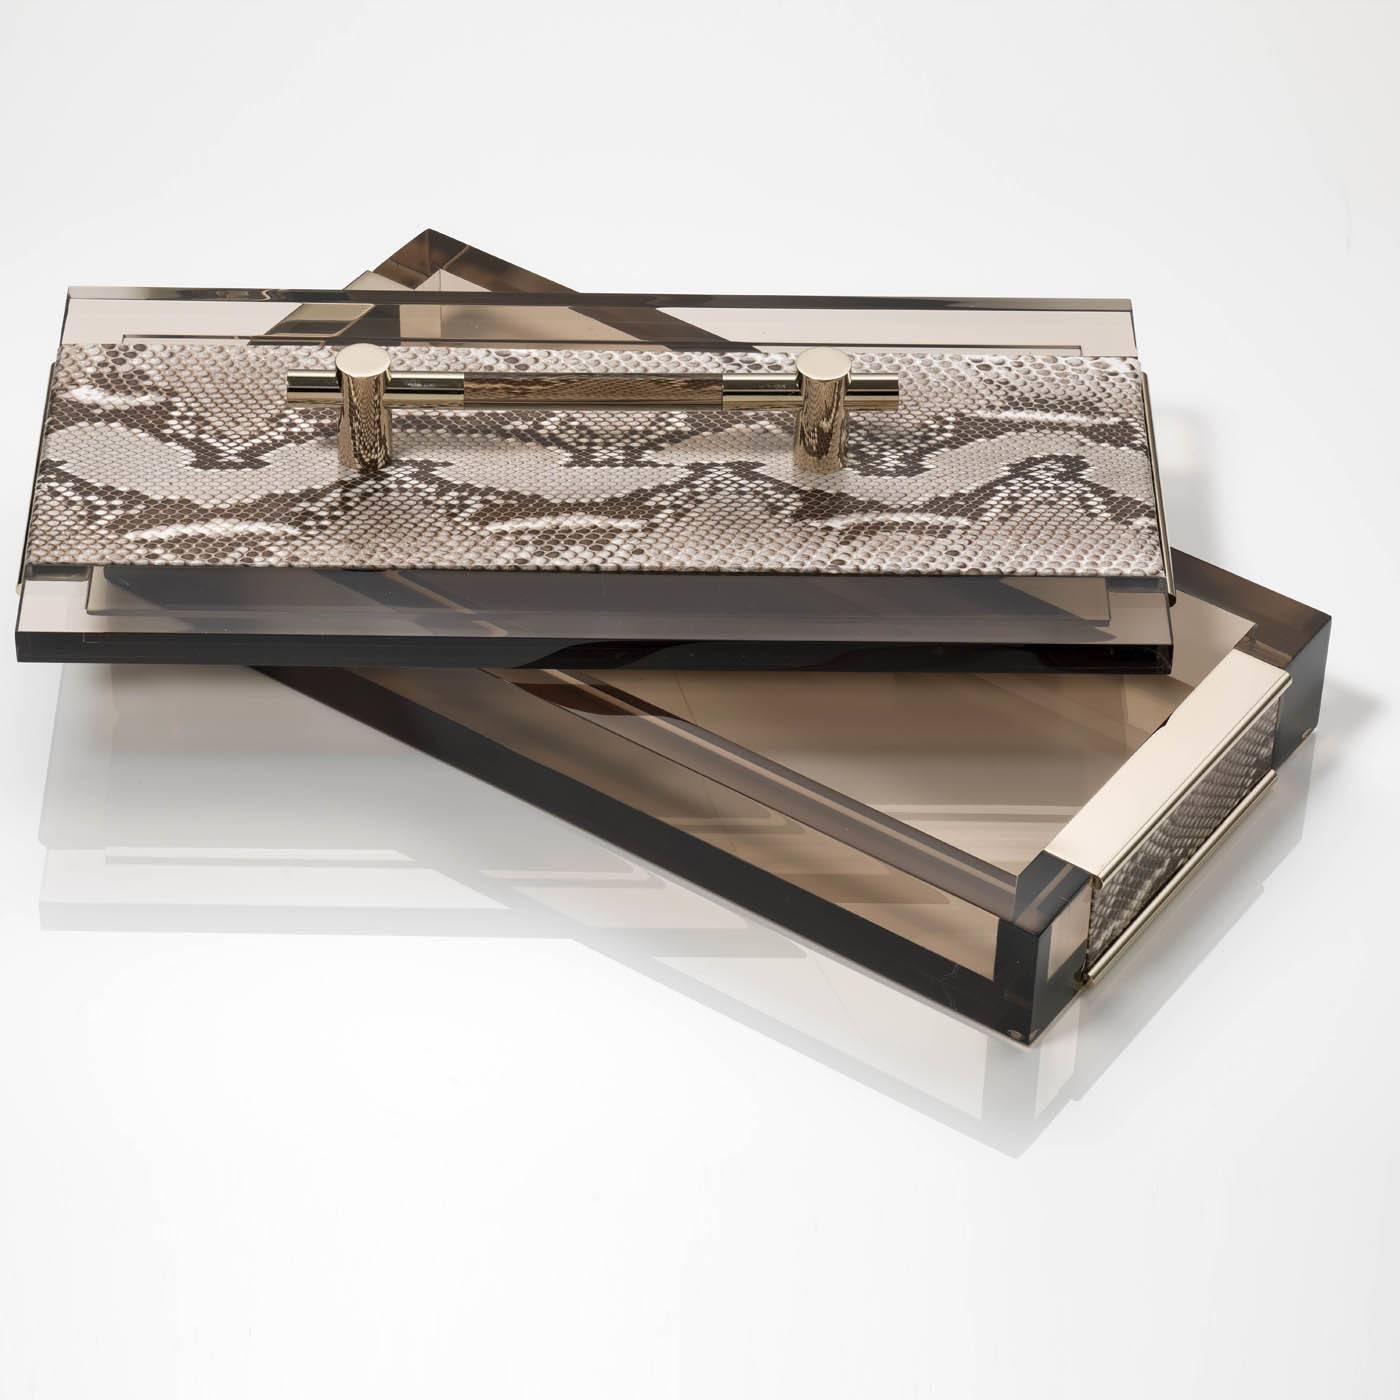 The lid and sides of this exquisite box crafted in translucent Lucite are decorated with natural brown python skin. The leather as well as the handle of the lid are accented in gold metal.